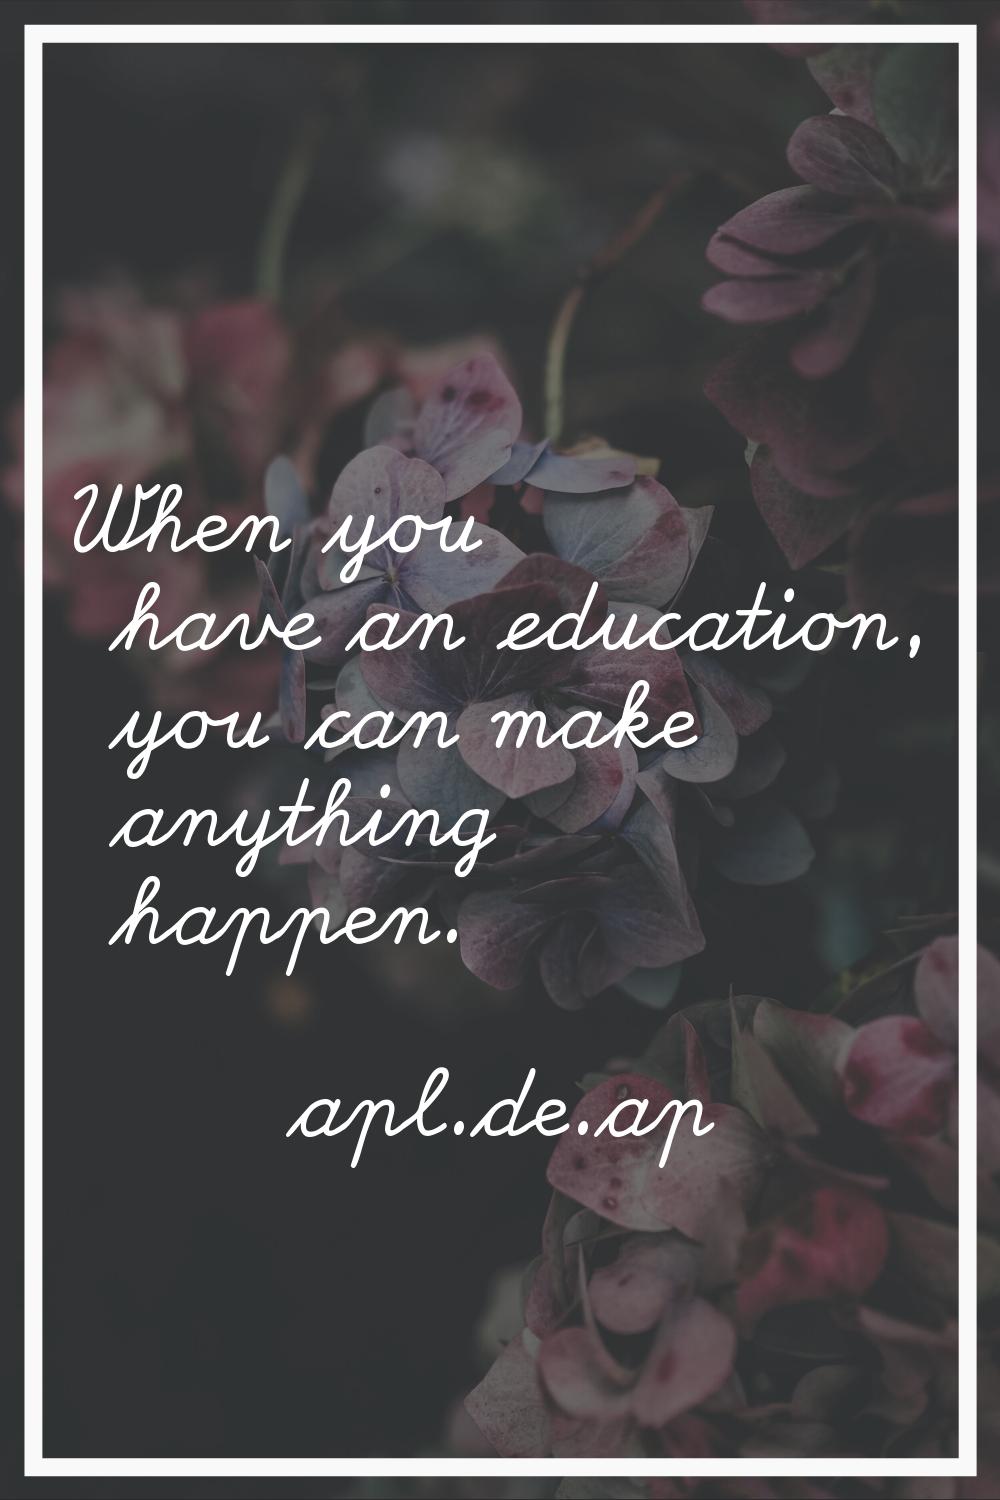 When you have an education, you can make anything happen.